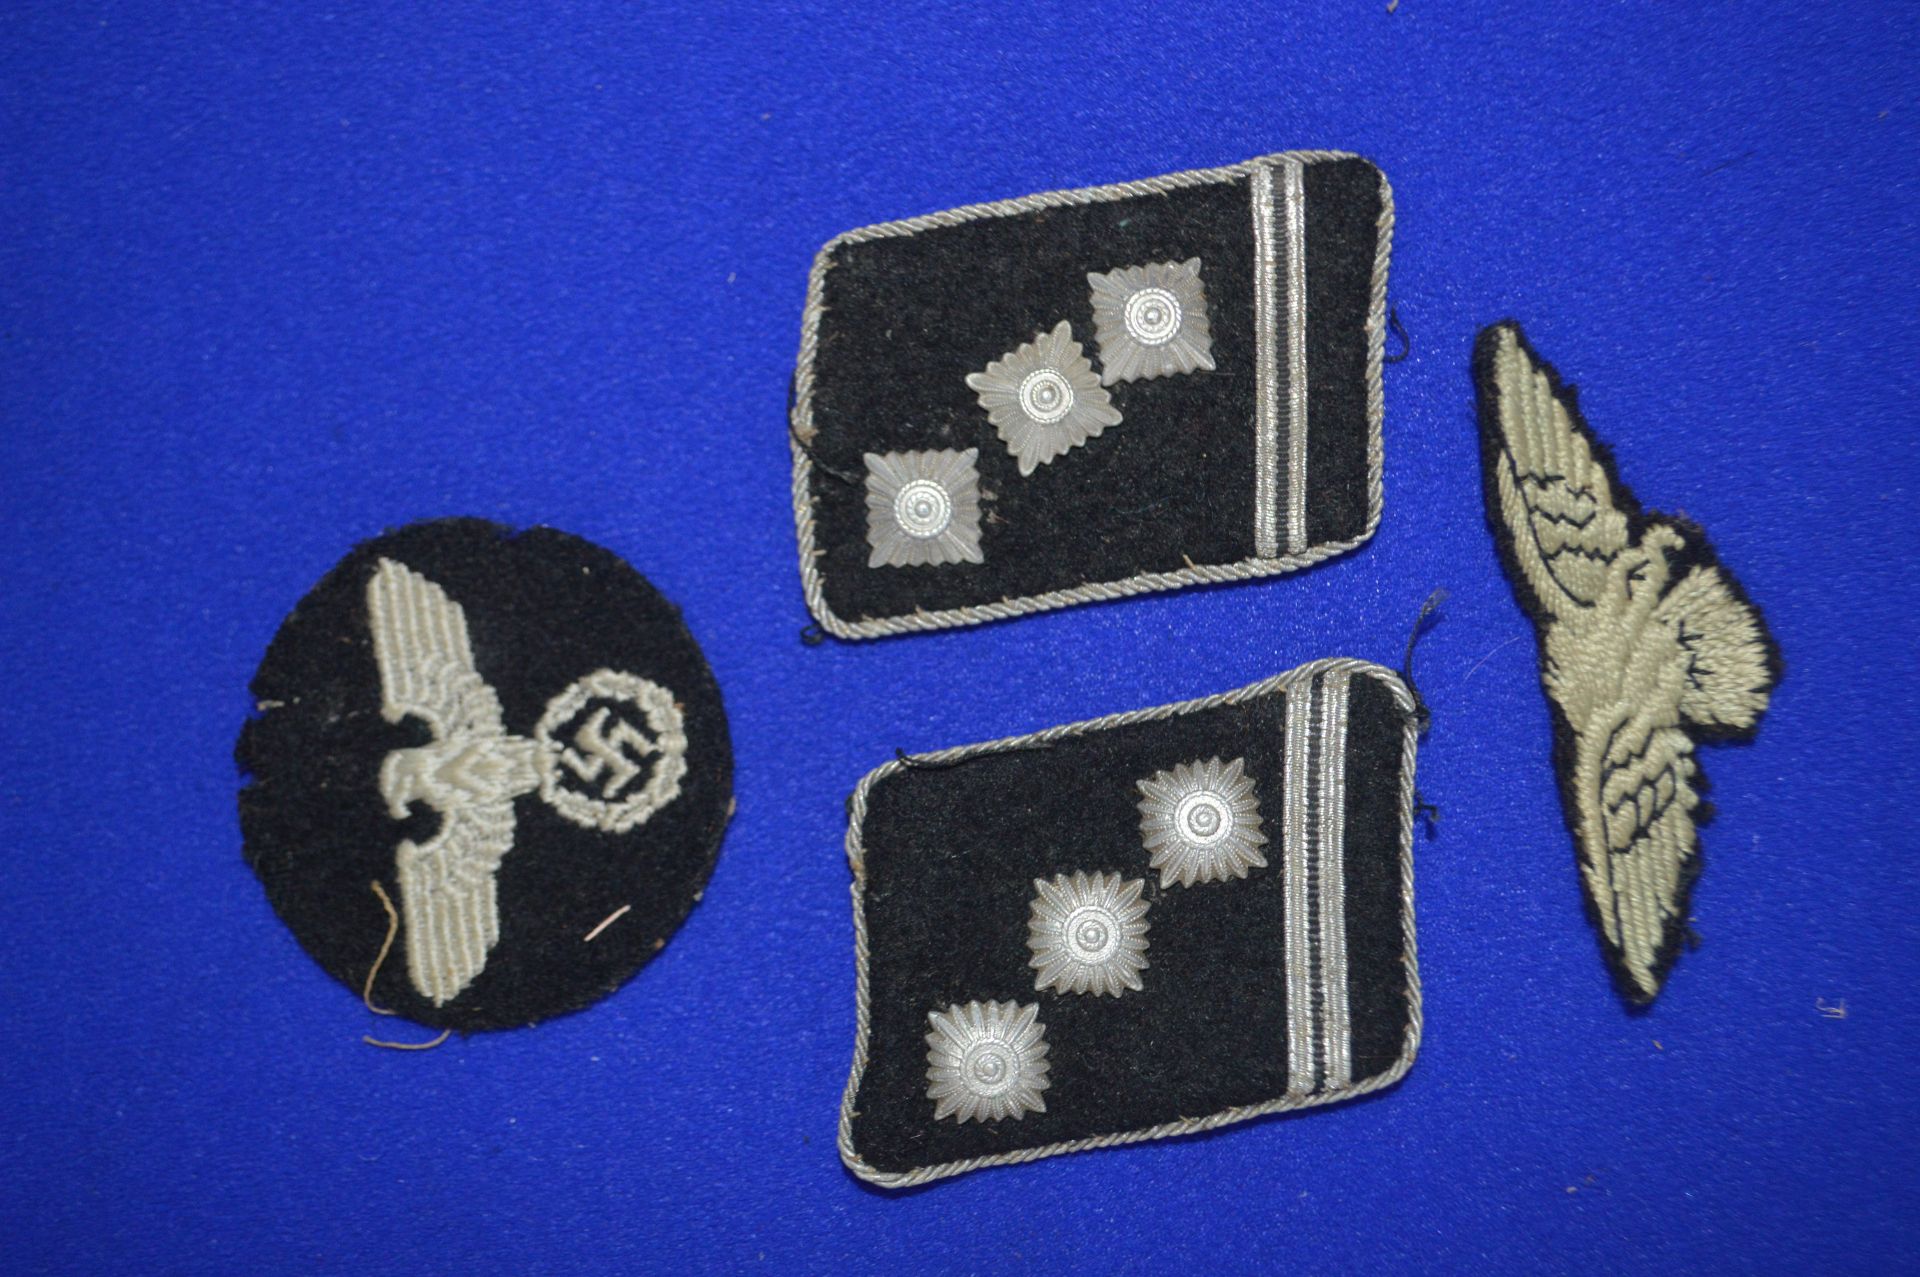 Military Medals, Badges, Kit Bags, and Assorted Items Including a German Belt - Image 10 of 13